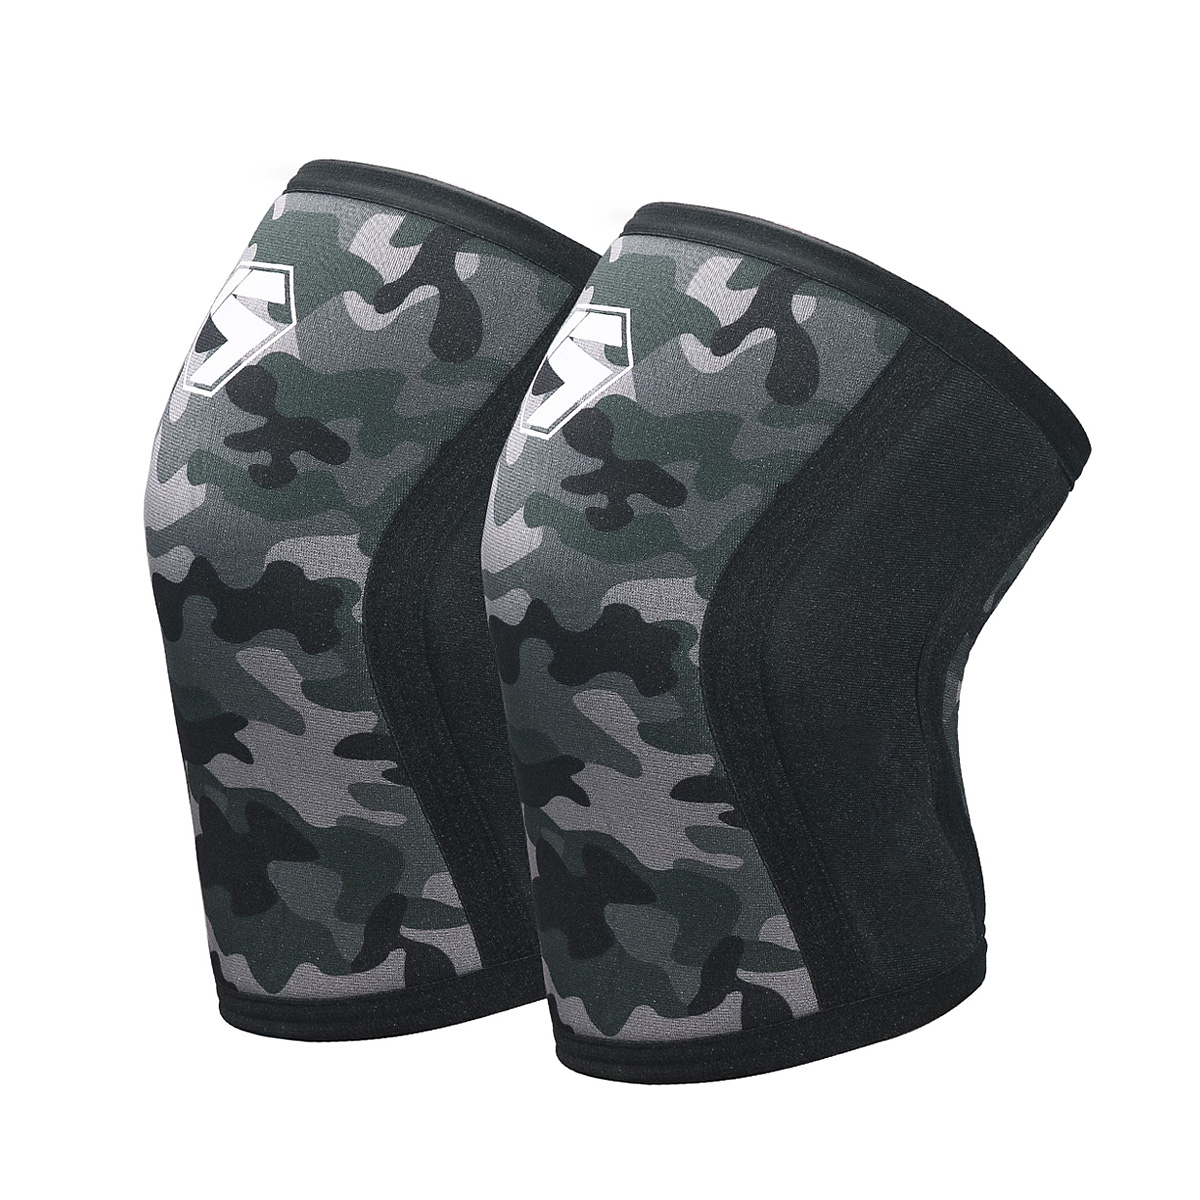 Breathable Neoprene Thick Knee Pads For Weightlifting